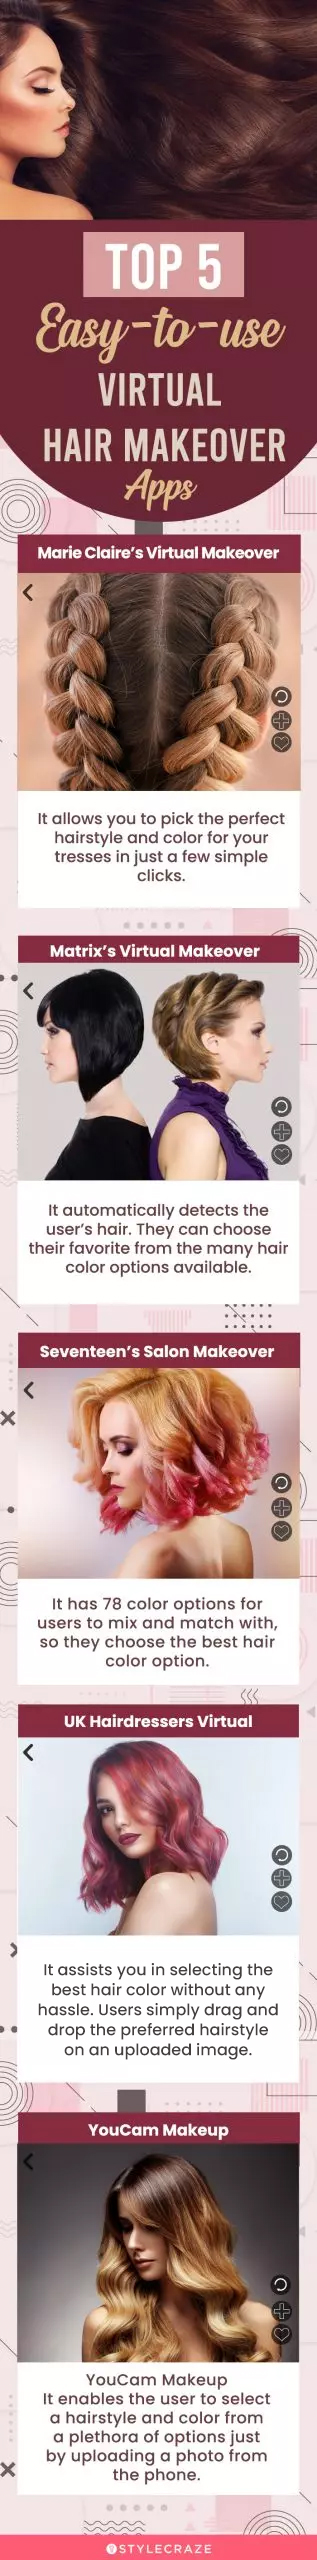 top 5 easy to use virtual hair makeover apps (infographic)